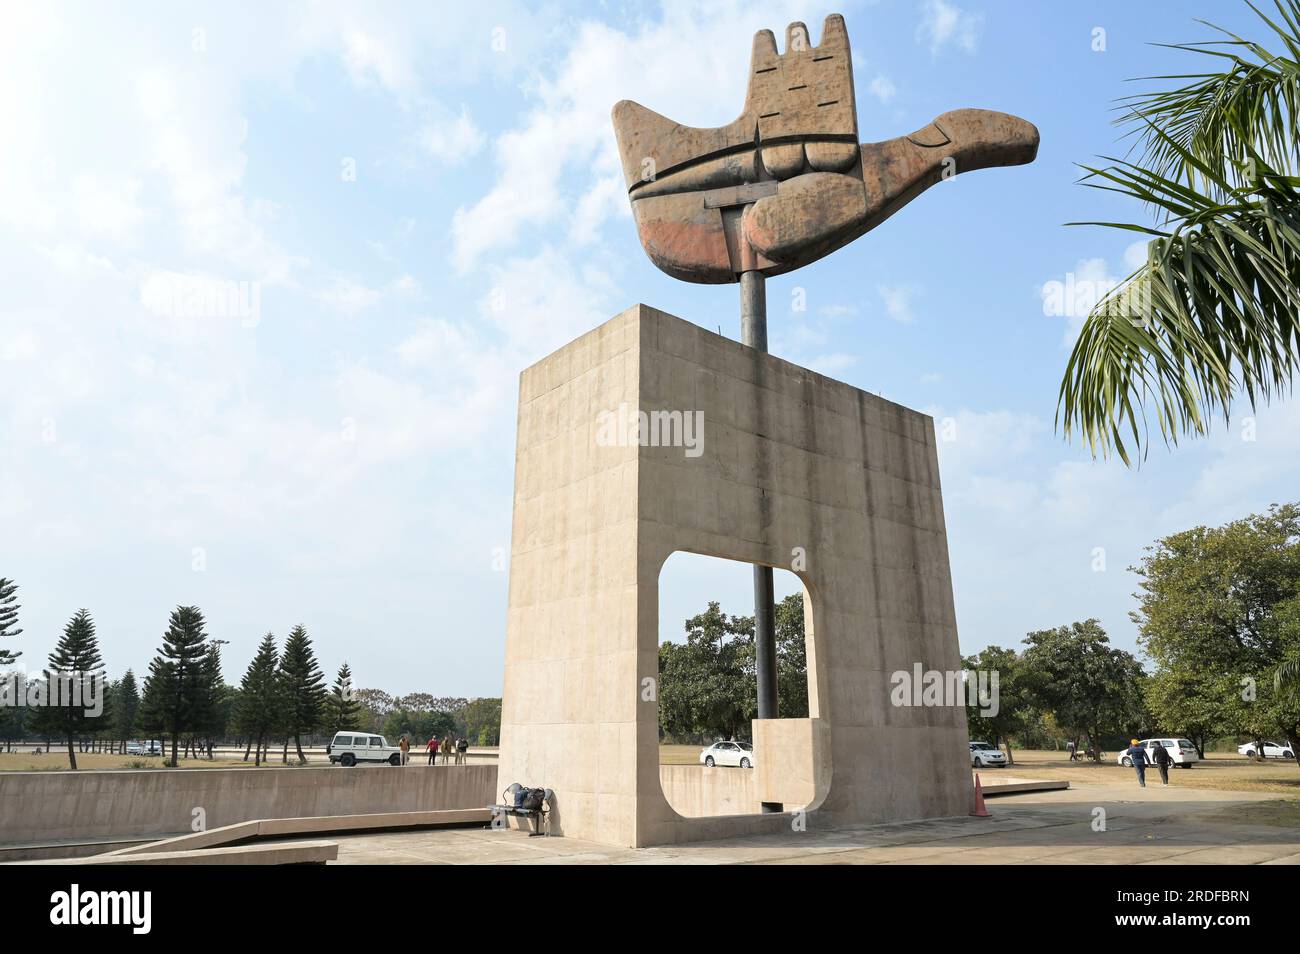 INDIA, Chandigarh, the master plan of the city divided in sectors was prepared by swiss-french architect Le Corbusier in the 1950` , Sector 1 Capitol complex, metal and concrete monument The Open Hand designed by Le Corbusier, symbolizes 'the hand to give and the hand to take; peace and prosperity, and the unity of mankind' Stock Photo